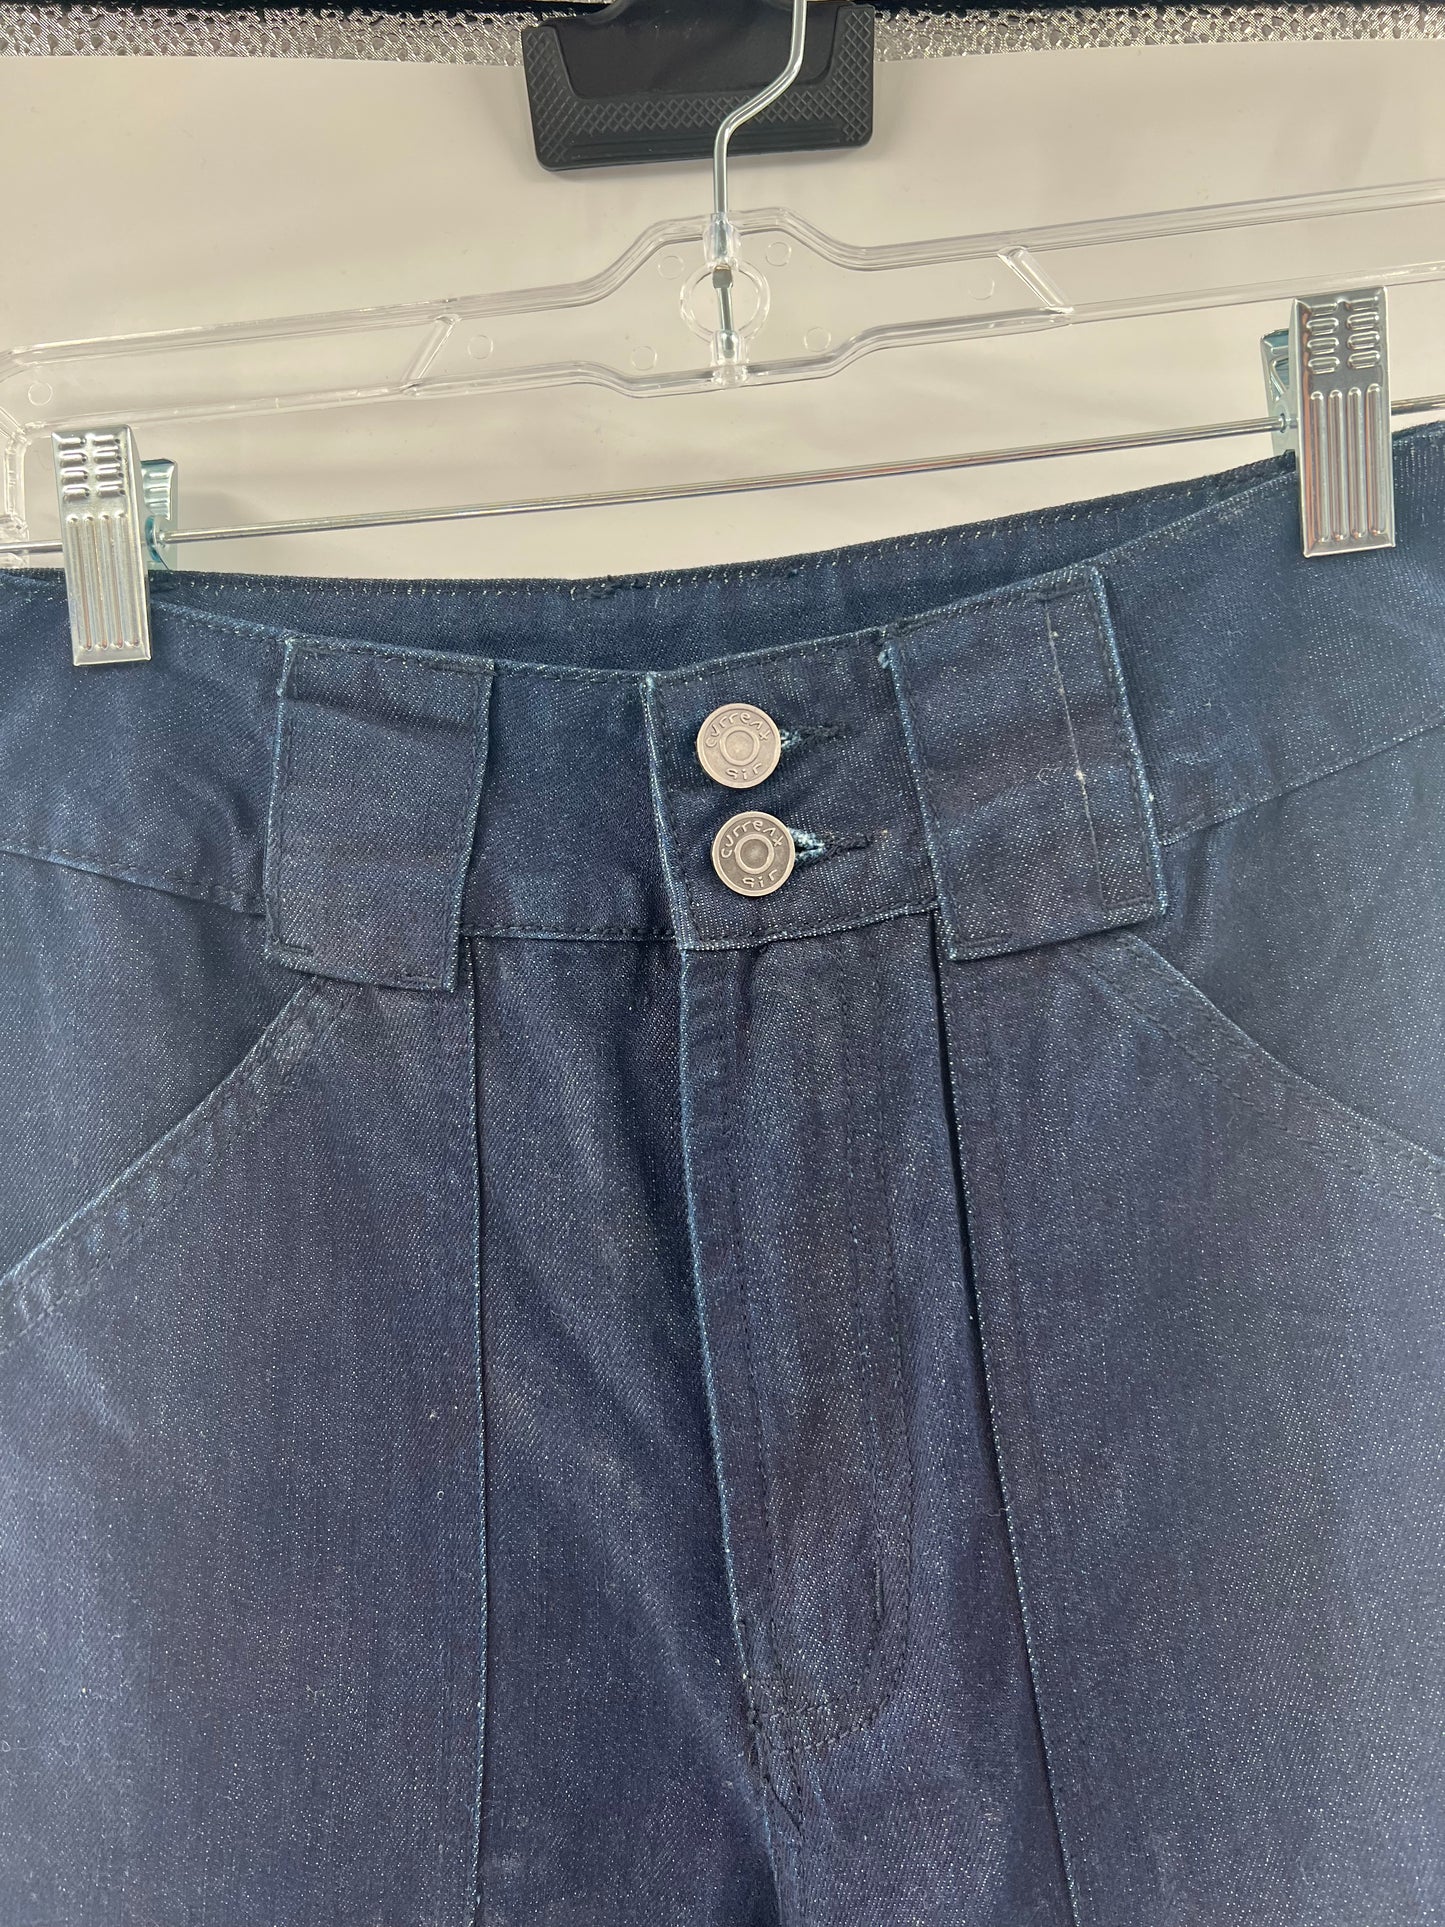 Current Air Anthropologie High Waisted Flare Jeans (Size XS)